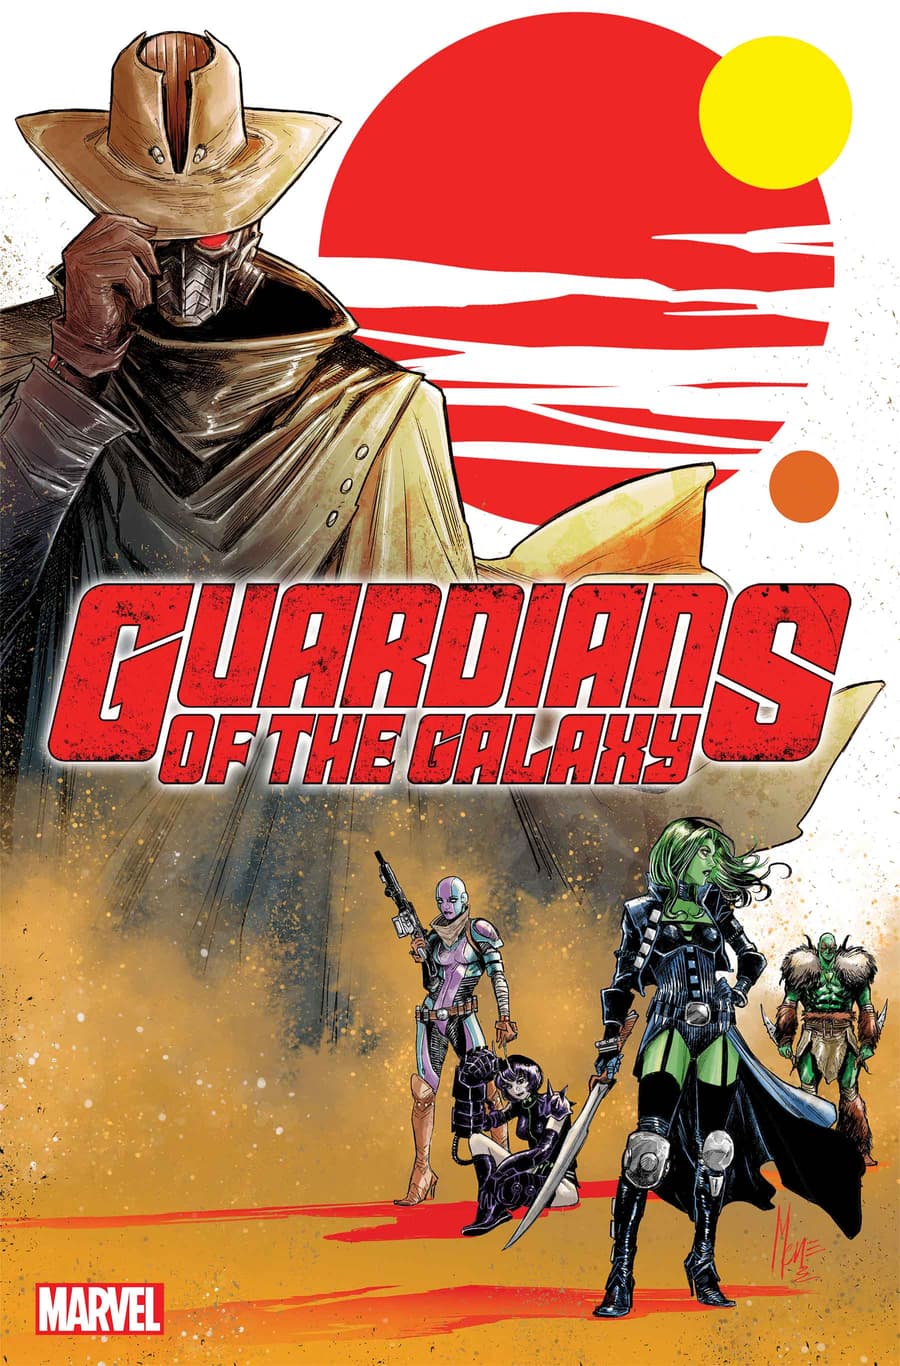 GUARDIANS OF THE GALAXY #1 cover by Marco Checchetto